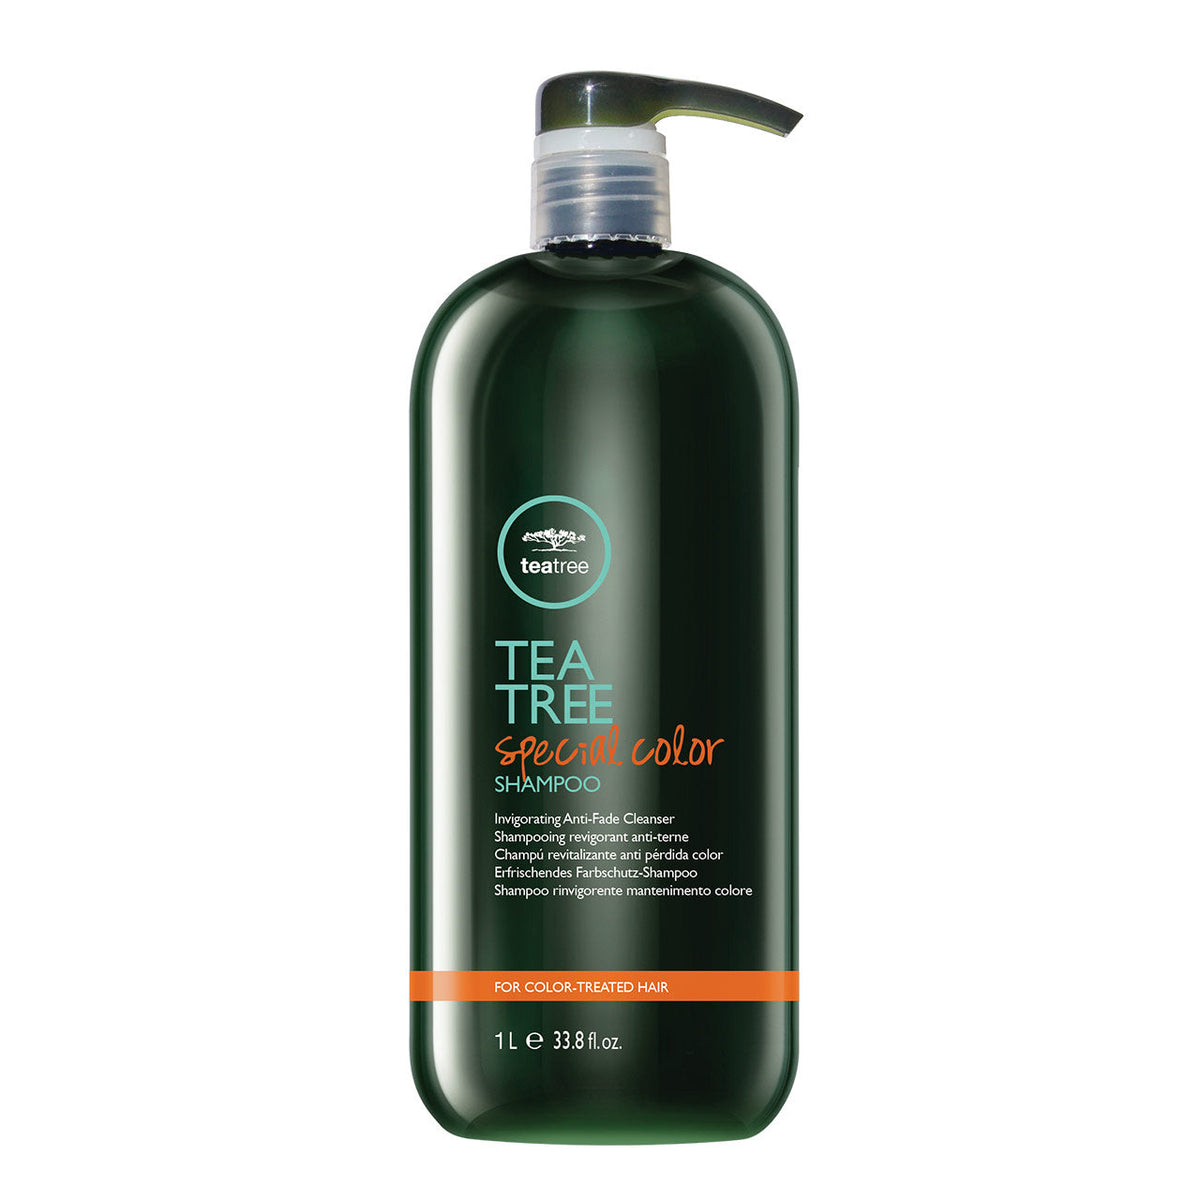 Tea Tree Special Color Shampoo - 1L - by Paul Mitchell |ProCare Outlet|